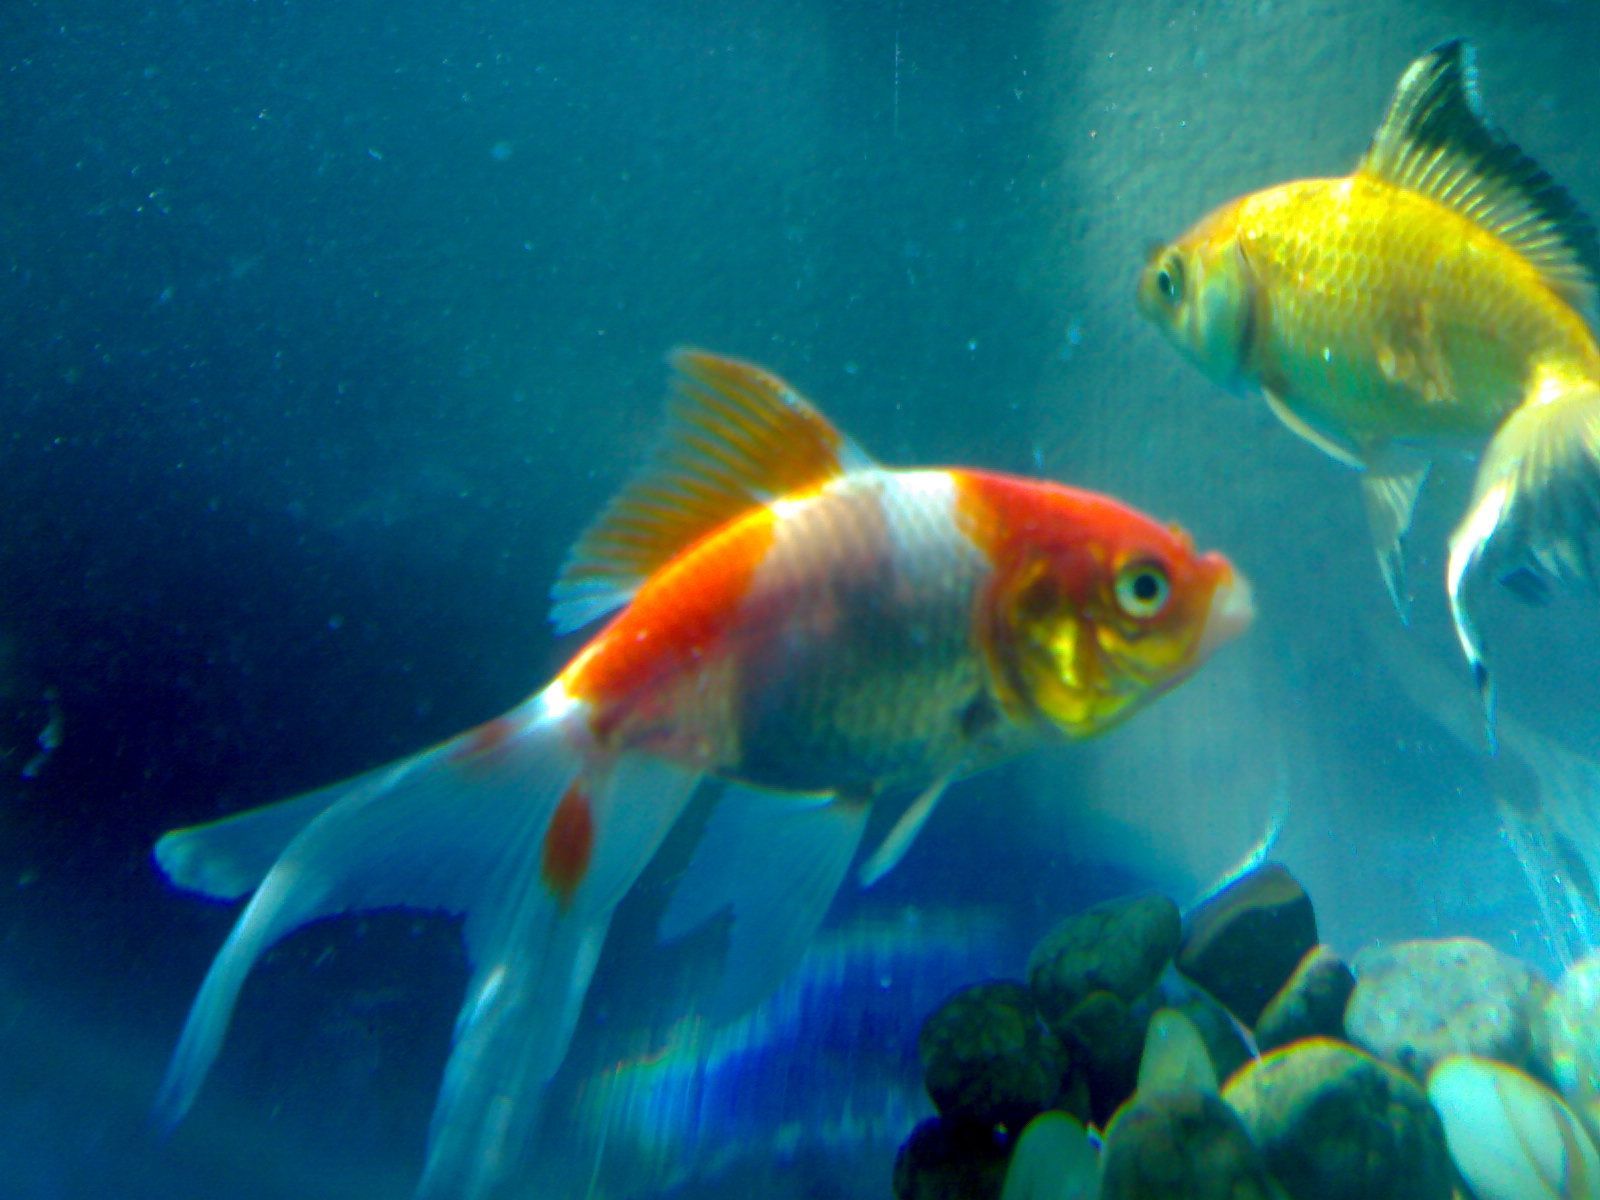 Beautiful Fish Wallpapers HD Pictures | One HD Wallpaper Pictures ...